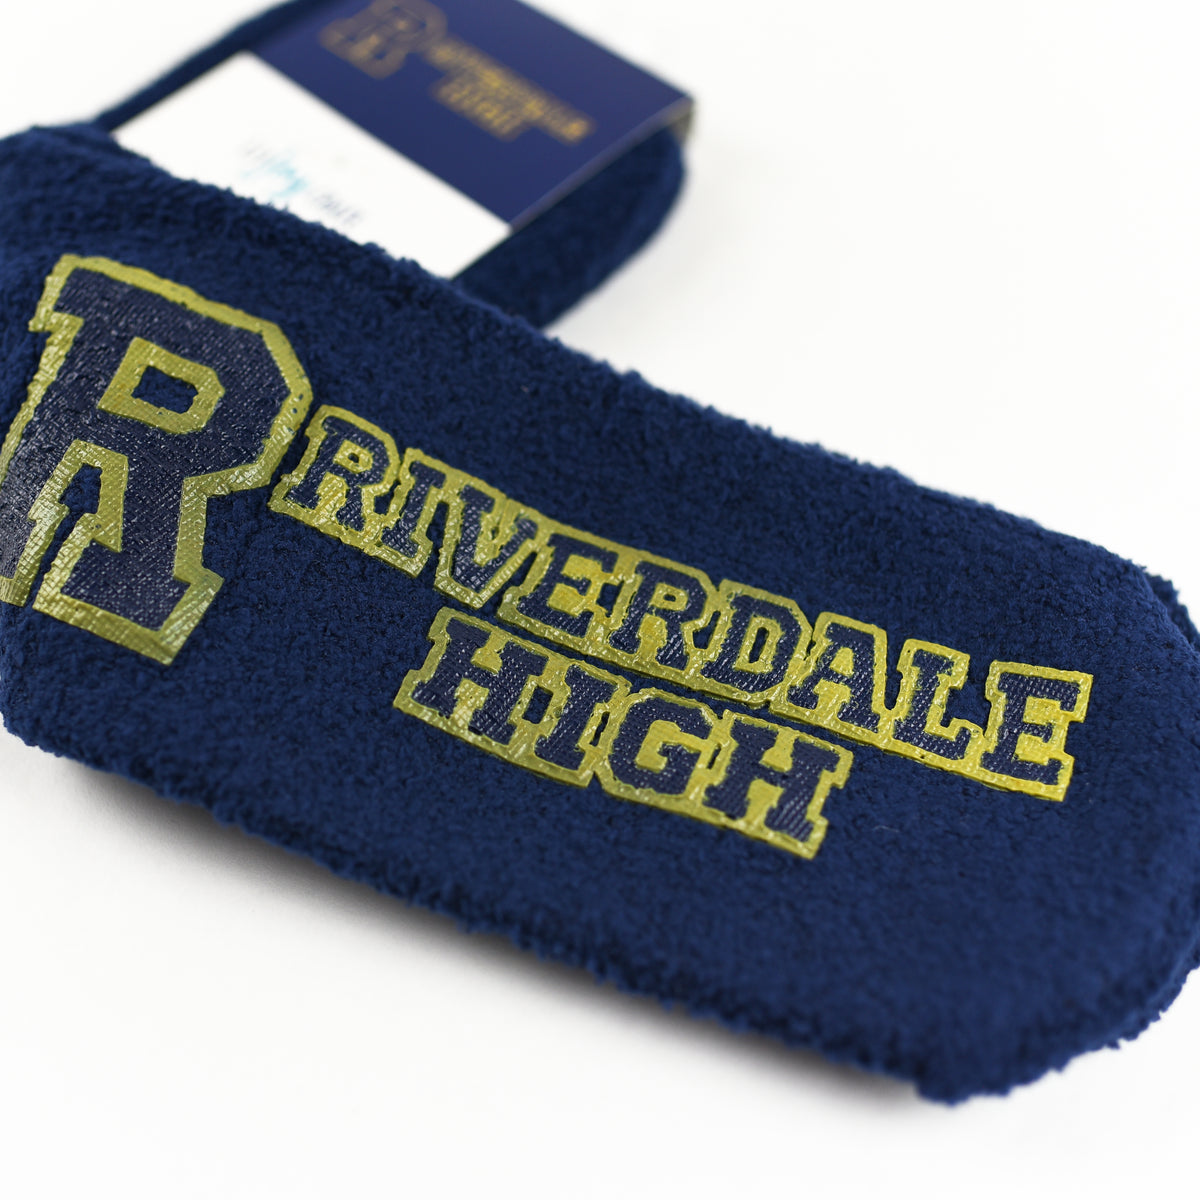 Riverdale Fuzzy Socks are dark blue with gold writing on the bottom of &quot;Riverdale High&quot;